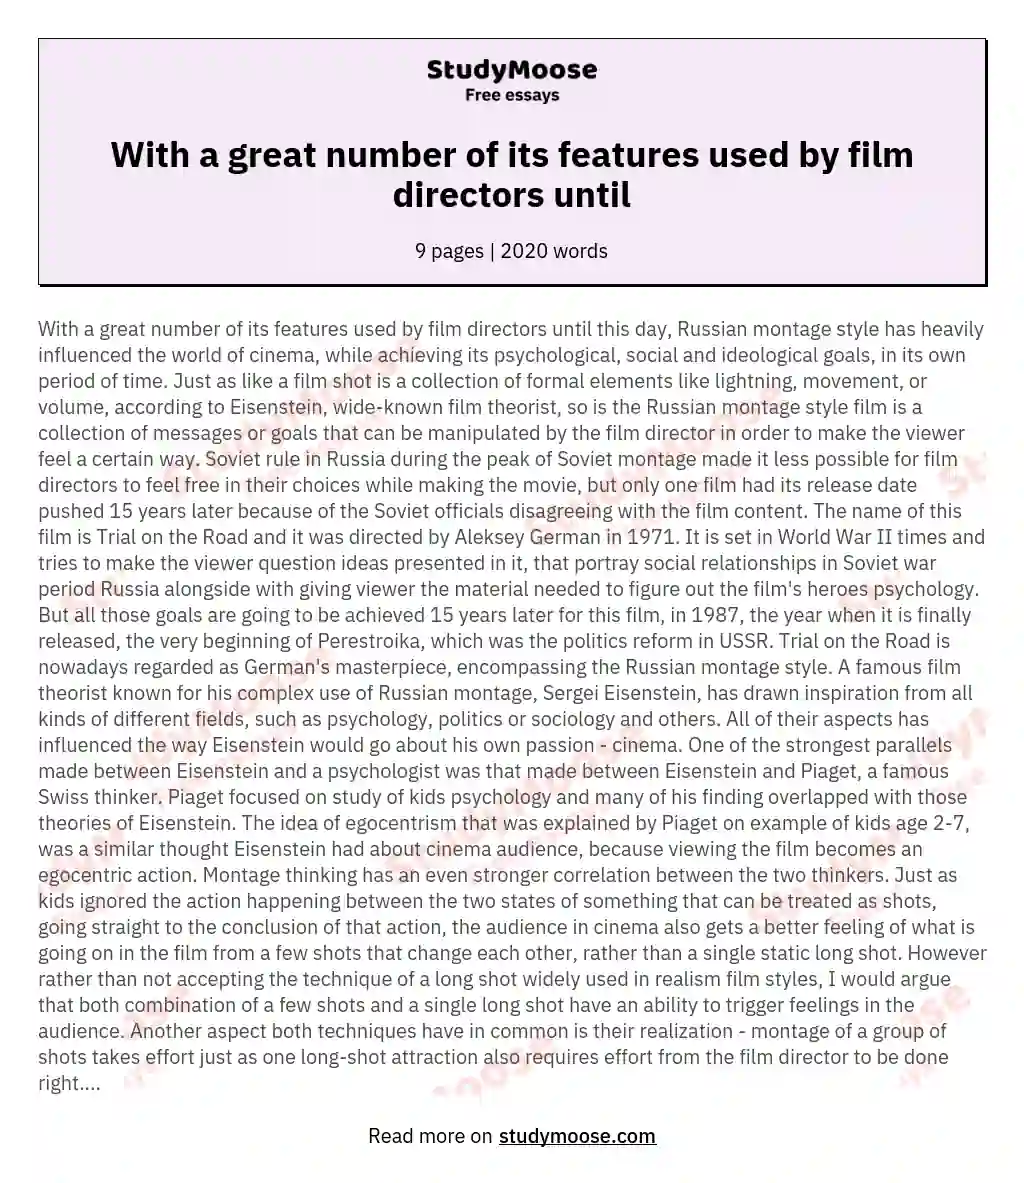 With a great number of its features used by film directors until